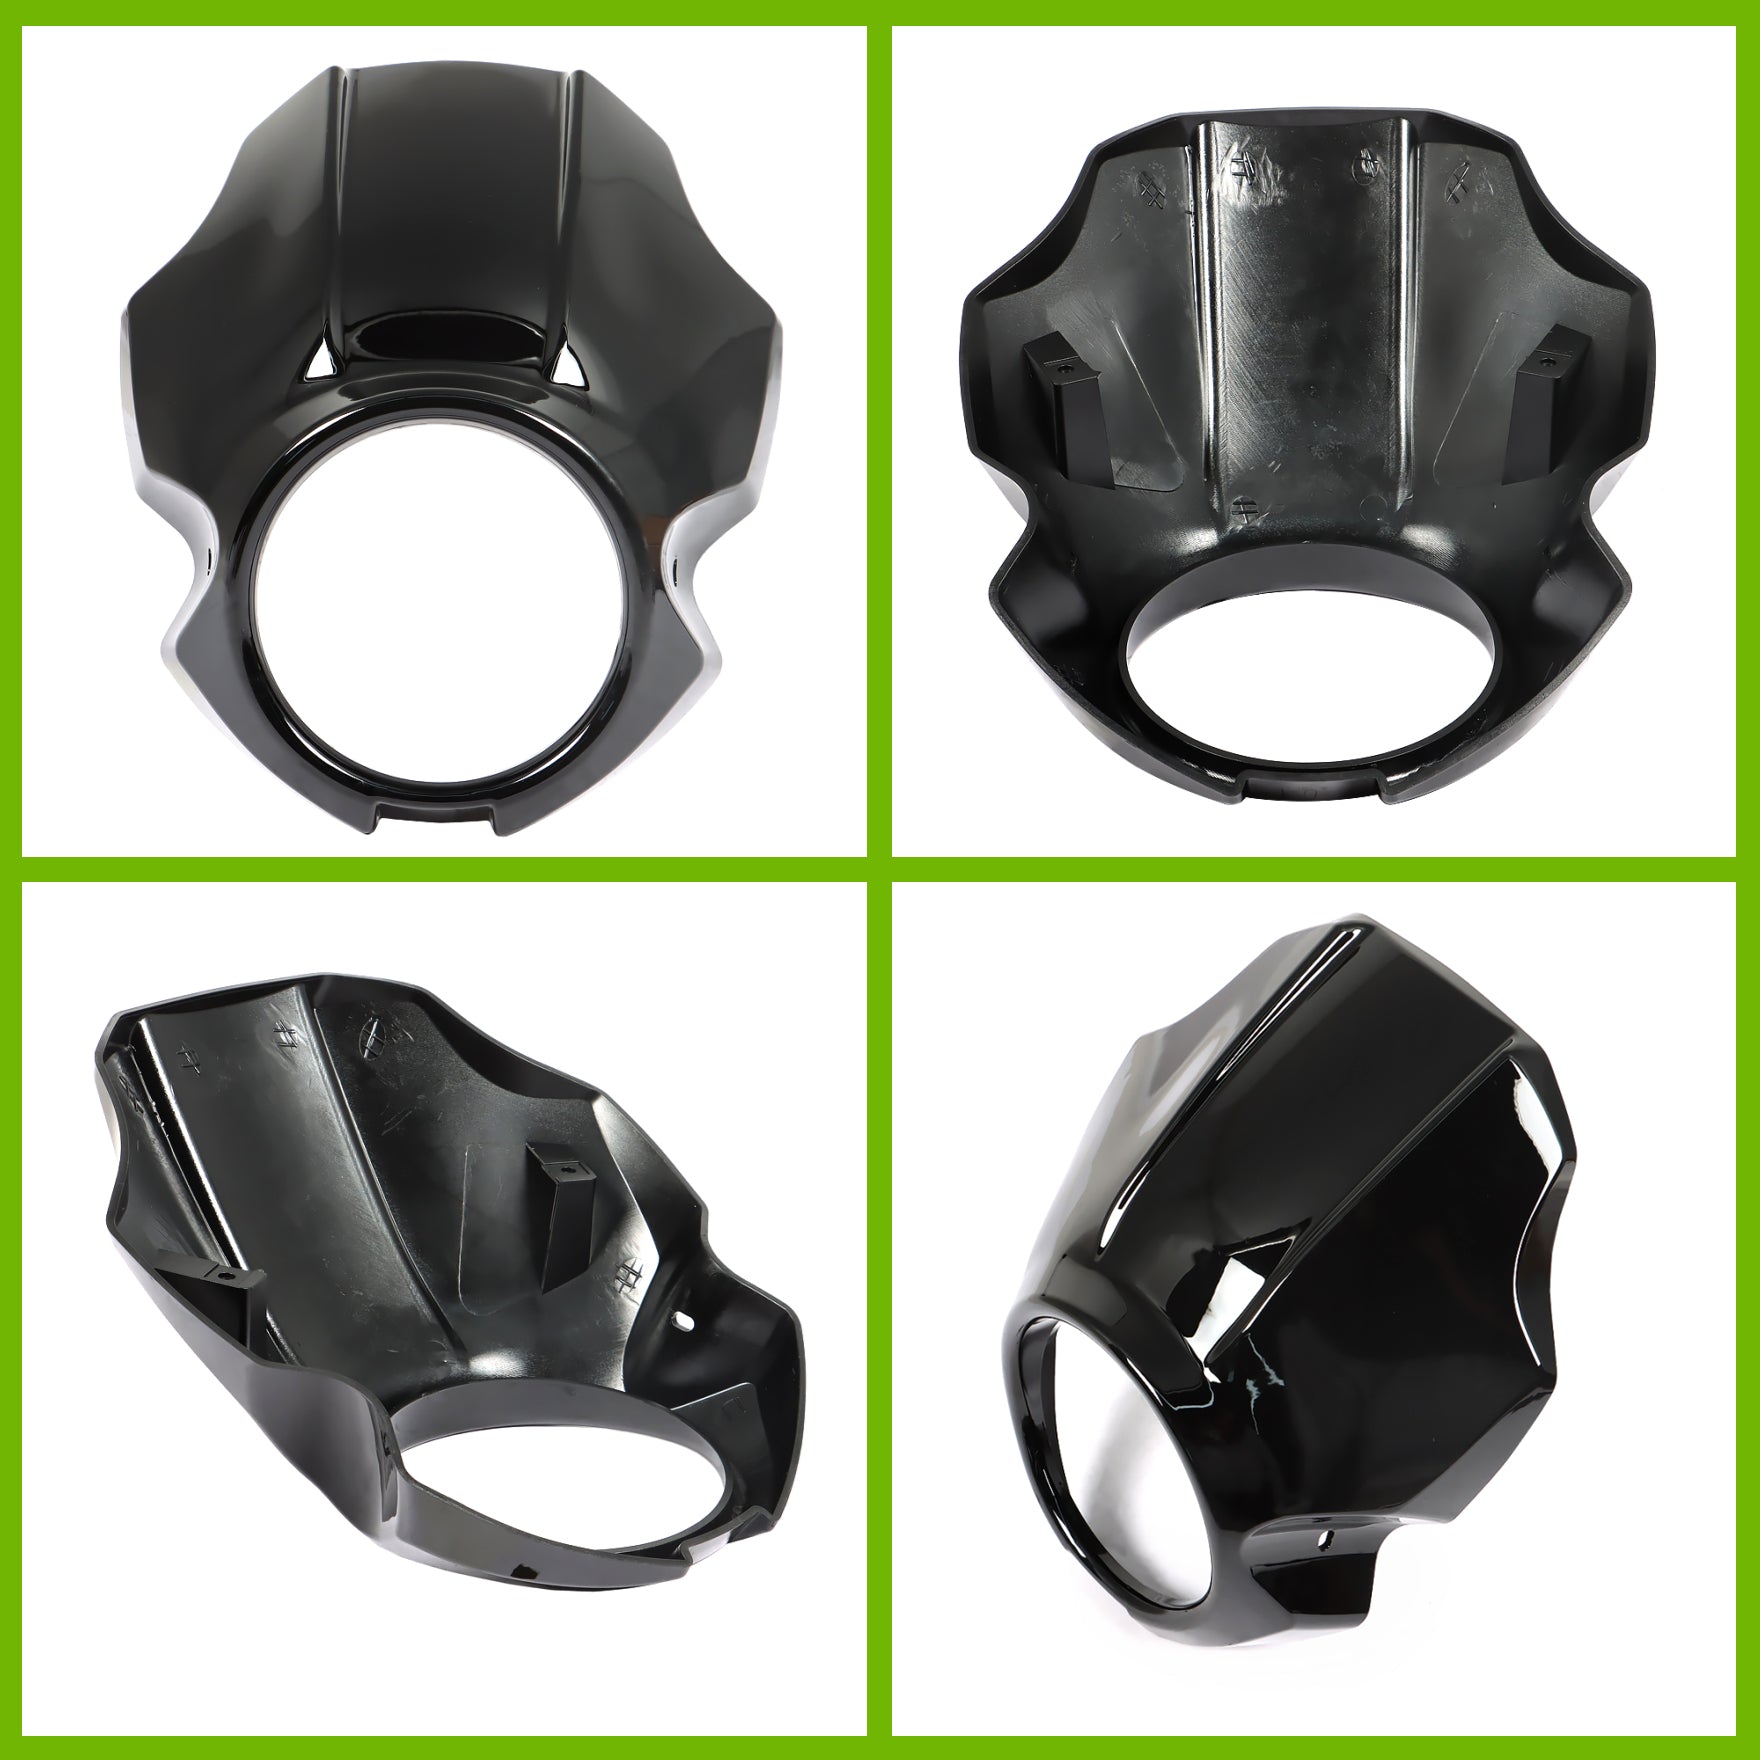 labwork Motorcycle Front Headlight Fairing Mask Cover Replacement for Yamaha XVS 950 SPEC Bolt 950 2014-2020